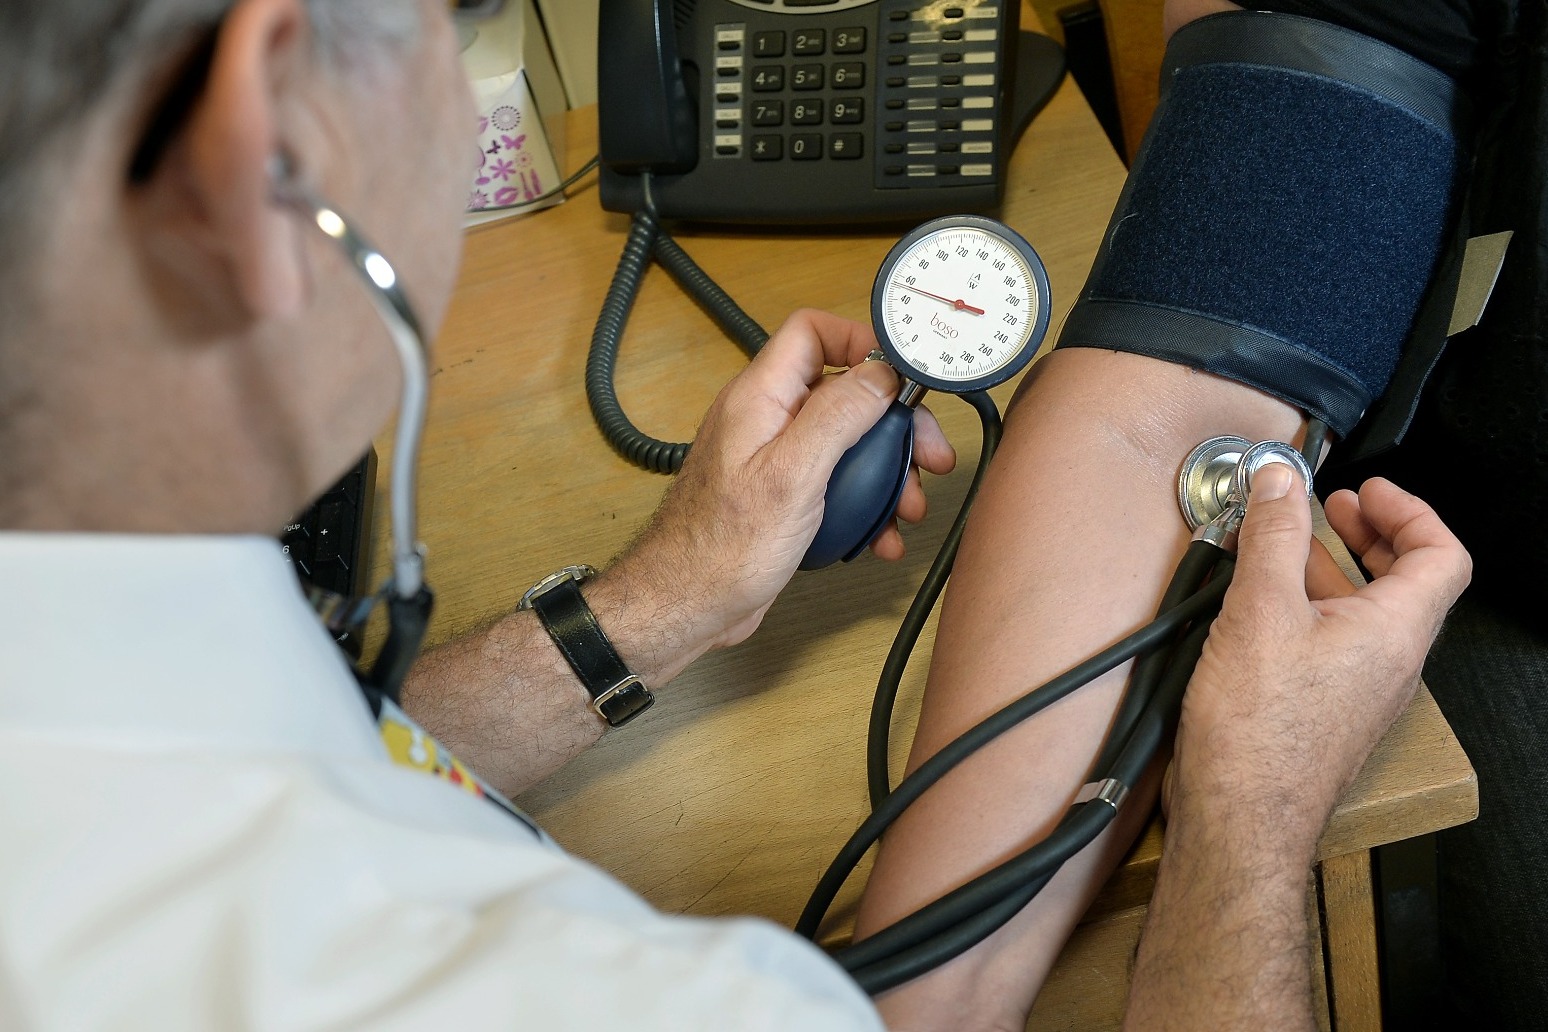 Fall in GP vacancies linked to funding for other roles, survey suggests 